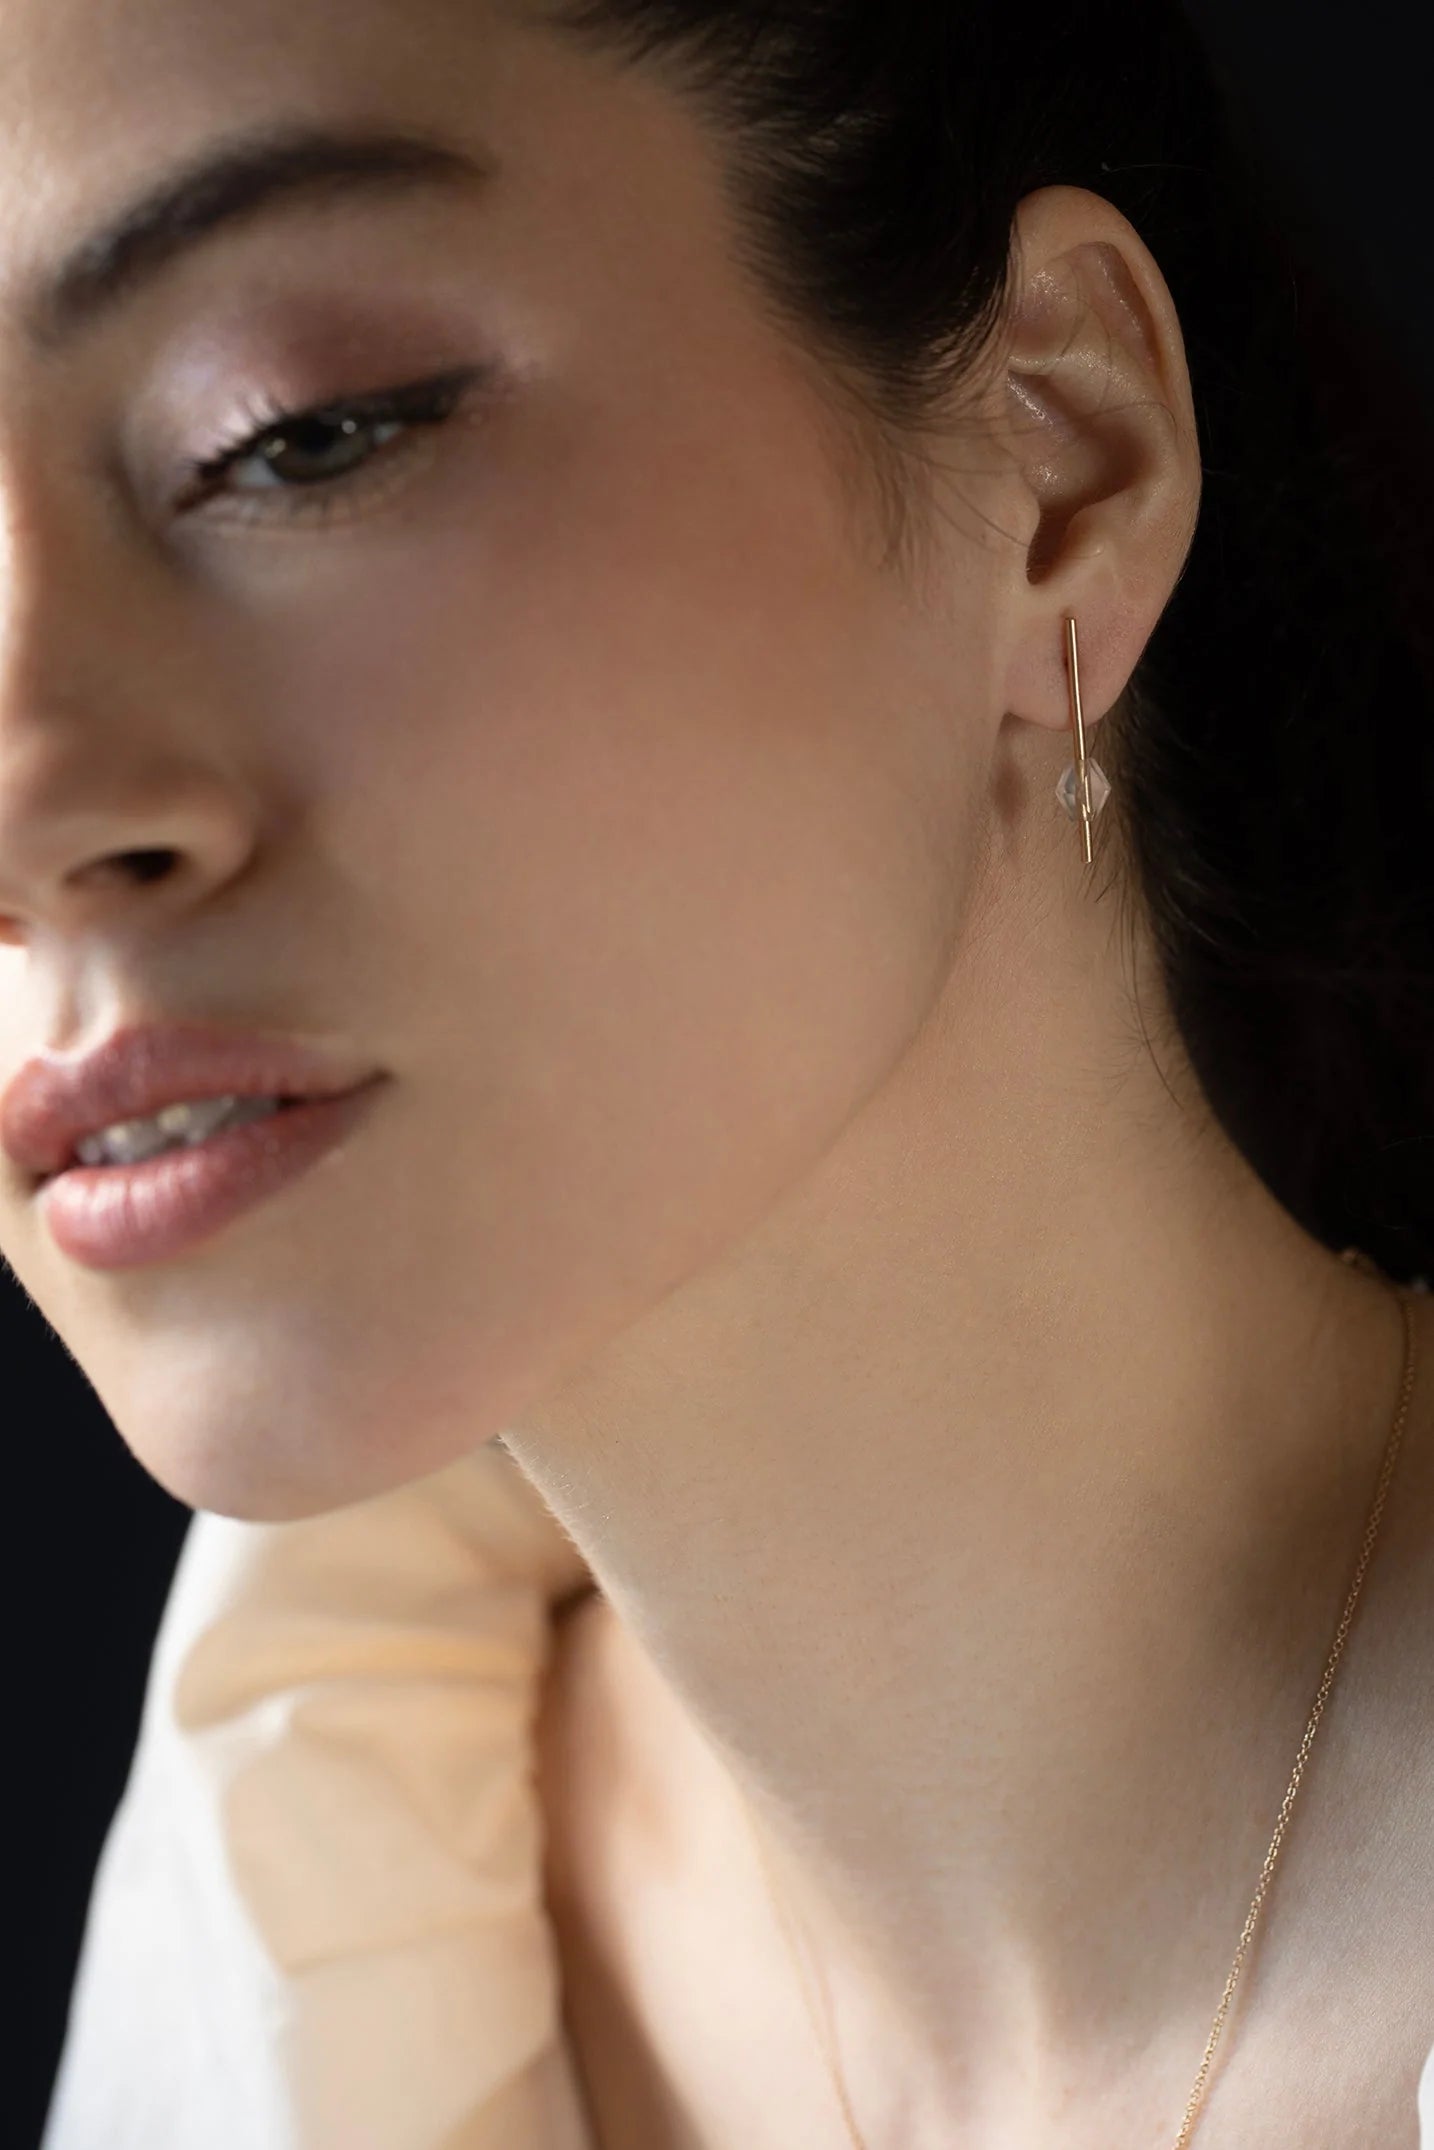 OLIVIA SHIH-Lucid Asymmetrical Line Studs-RECYCLED GOLD (WHEN POSSIBLE)